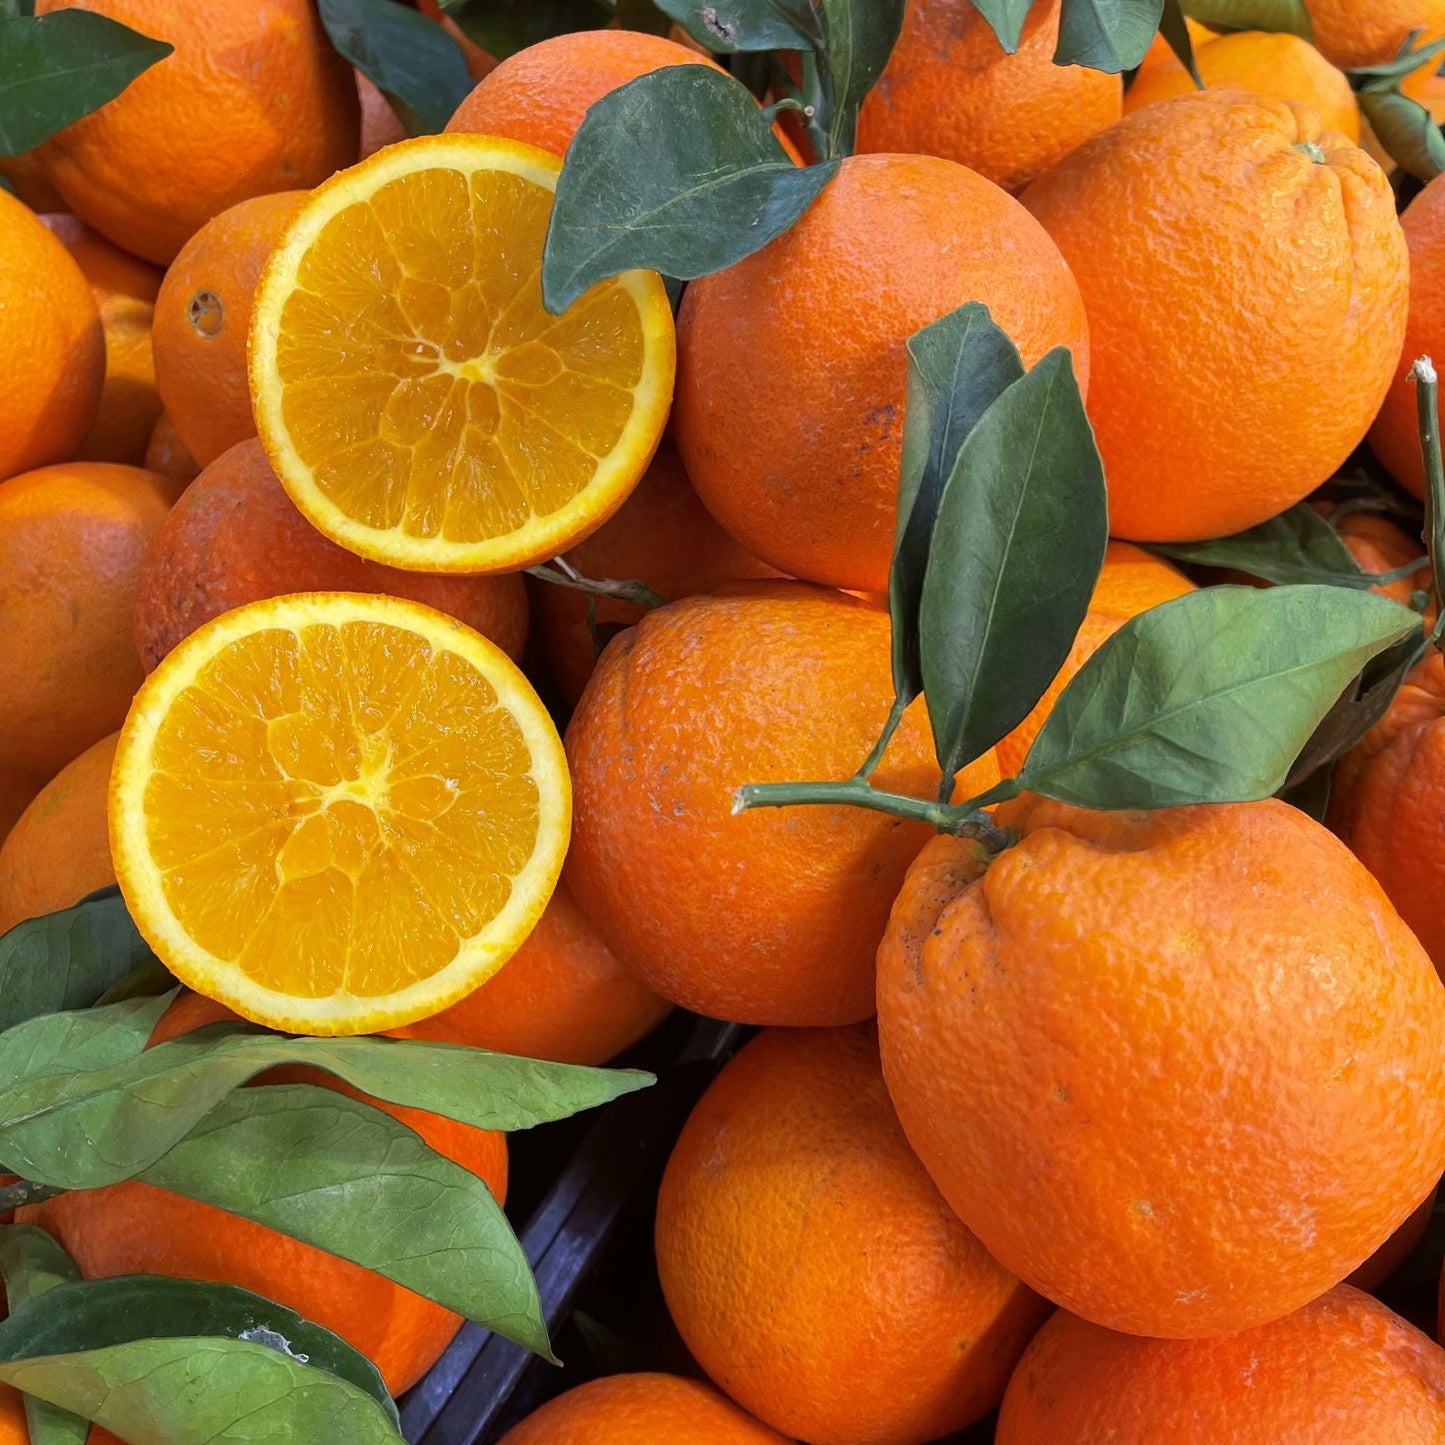 Sicilian Blonde Navel Oranges for the Table - Free Shipping - Iblagrumi